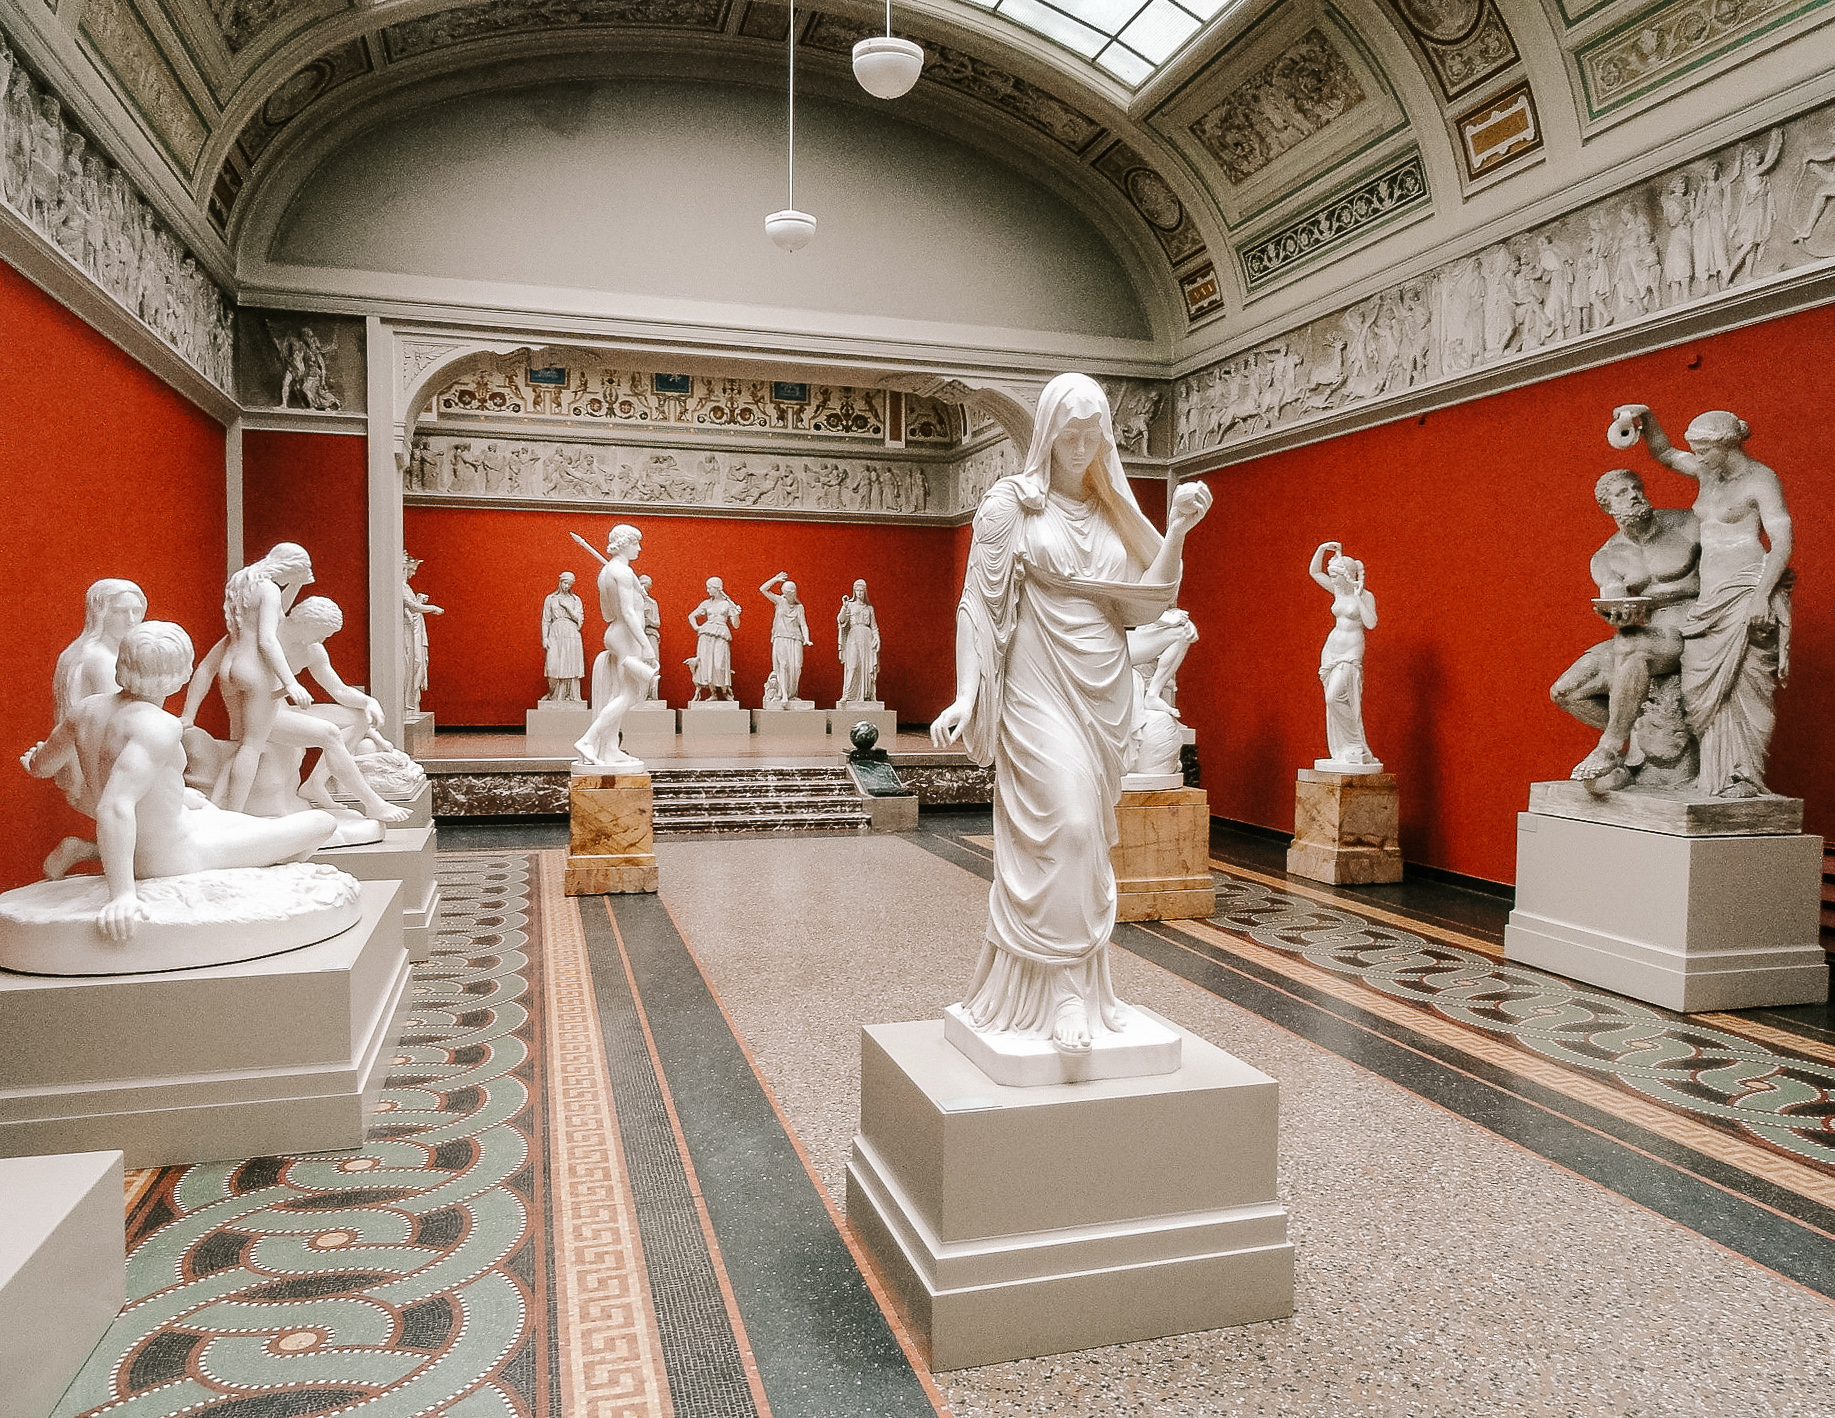 The interiors of a museum in Copenhagen in with many white marble sculptures of human figures in a red room.